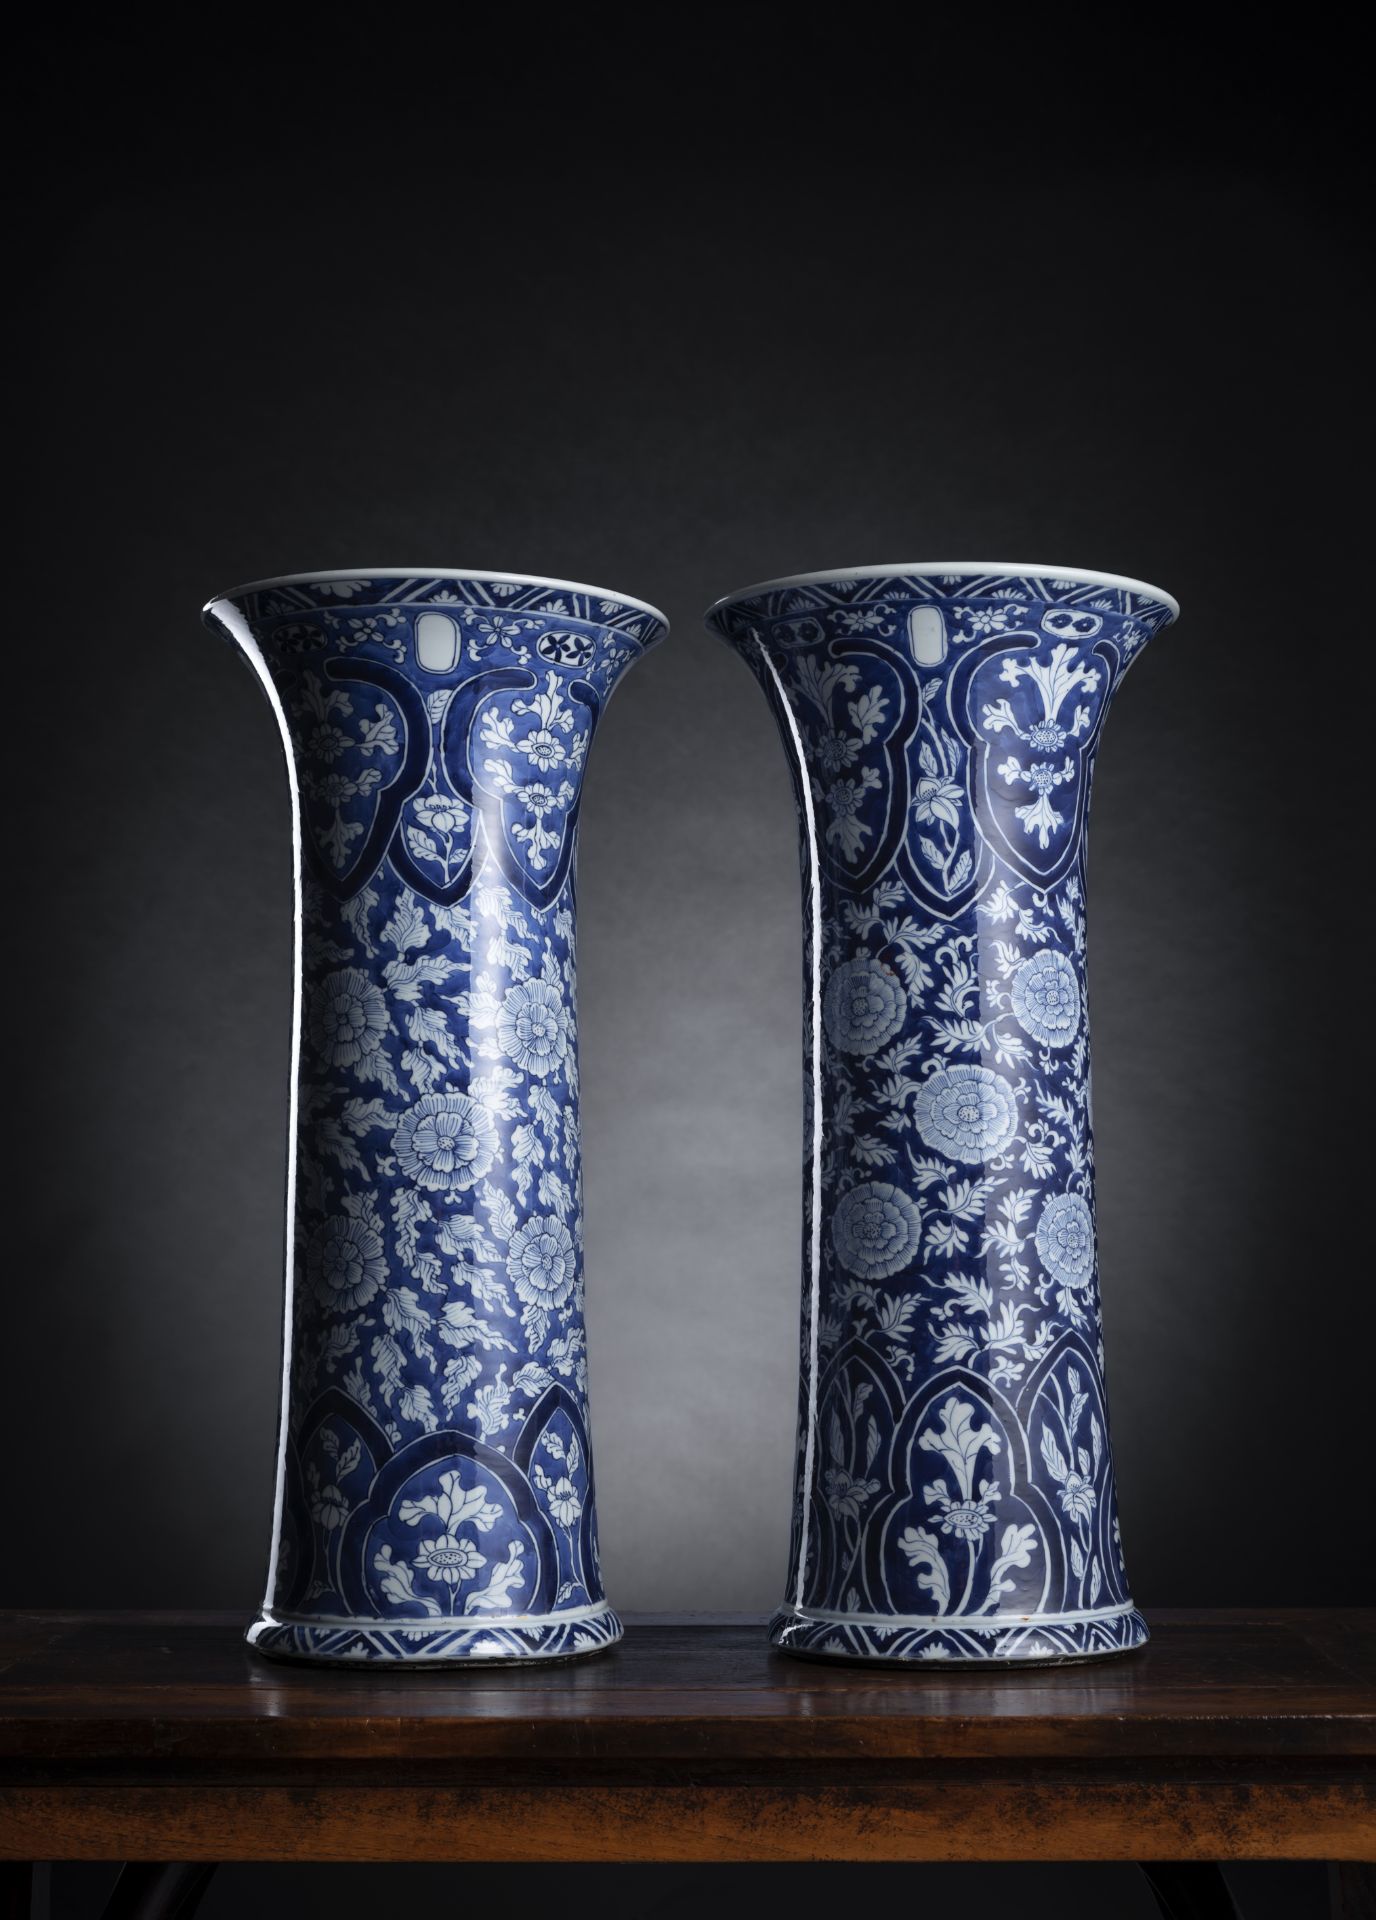 A FINE AND VERY RARE PAIR OF BLUE AND WHITE VASES WITH DIFFERENT FLOWERS SCROLLWORK FROM THE COLLEC - Image 2 of 7